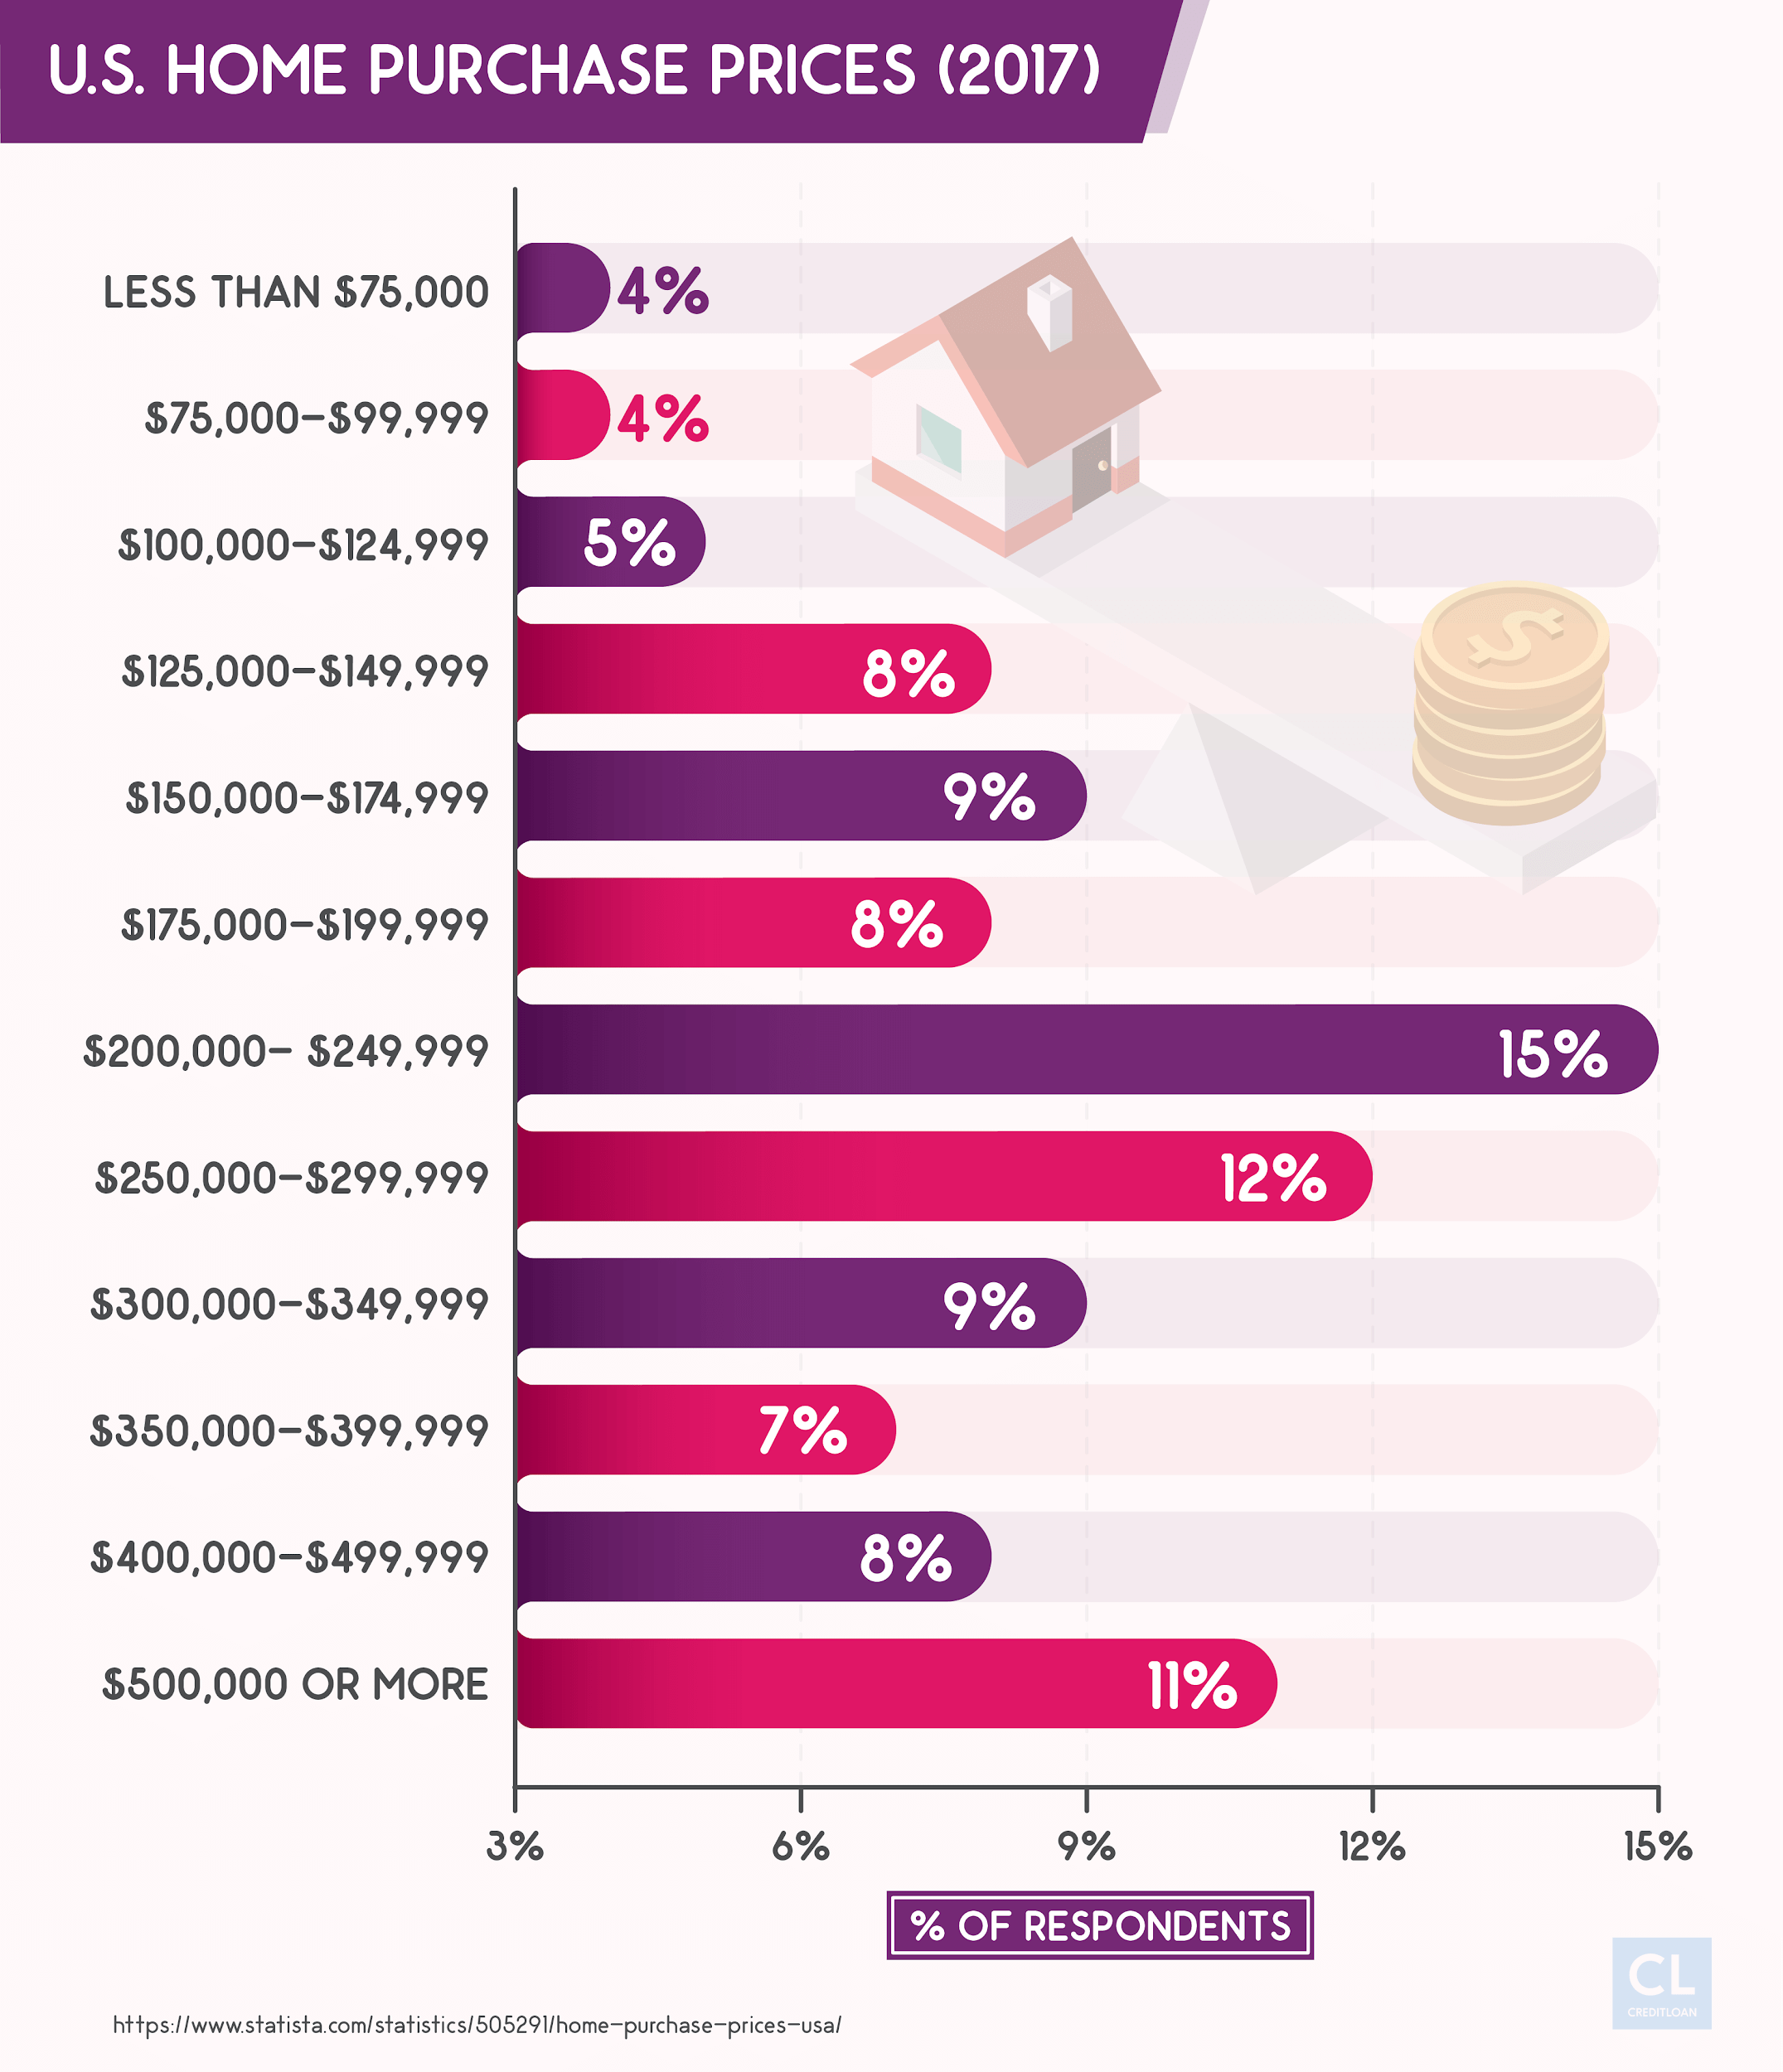 2017 U.S. Home Purchase Prices